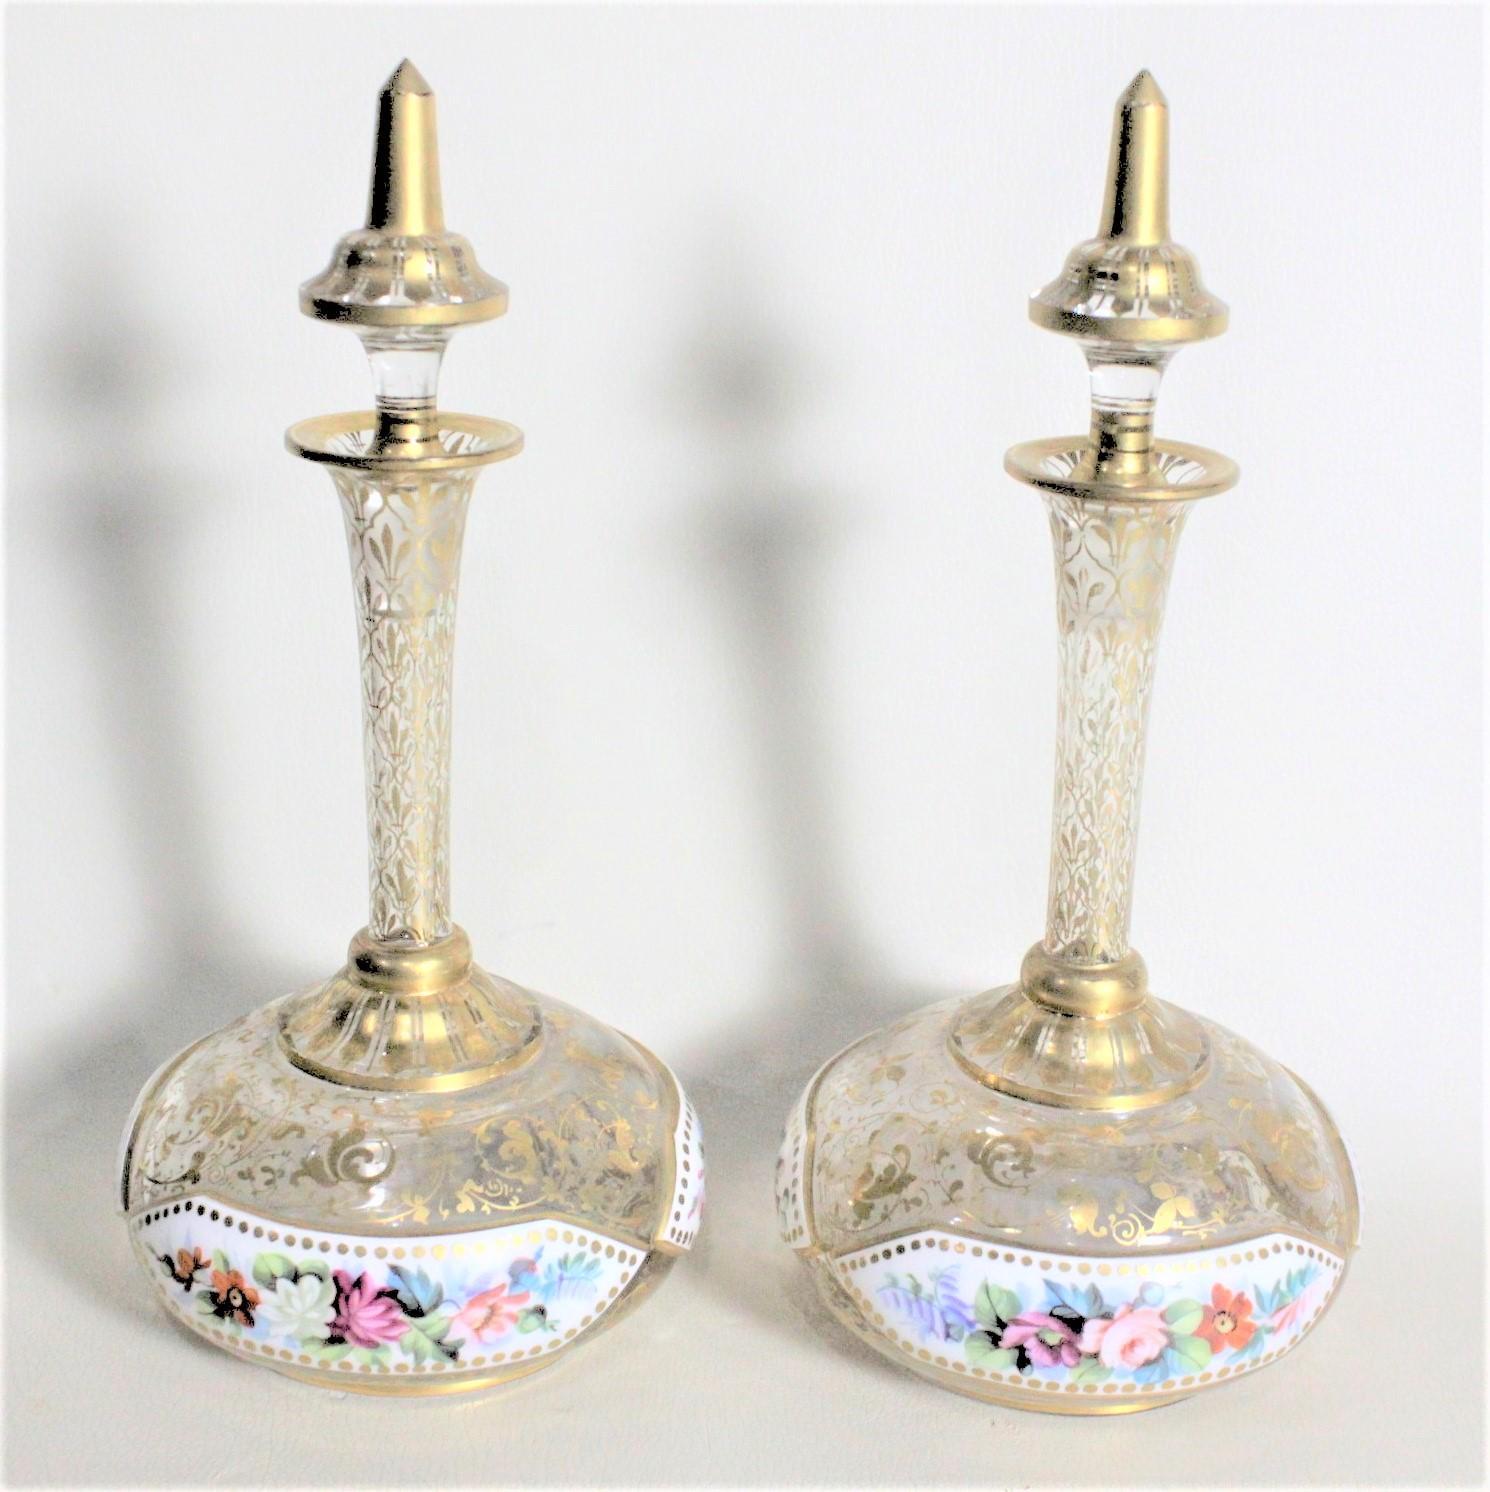 Enameled Pair of Antique Bohemian Perfume or Scent Bottles with Enamel & Gilt Decoration For Sale